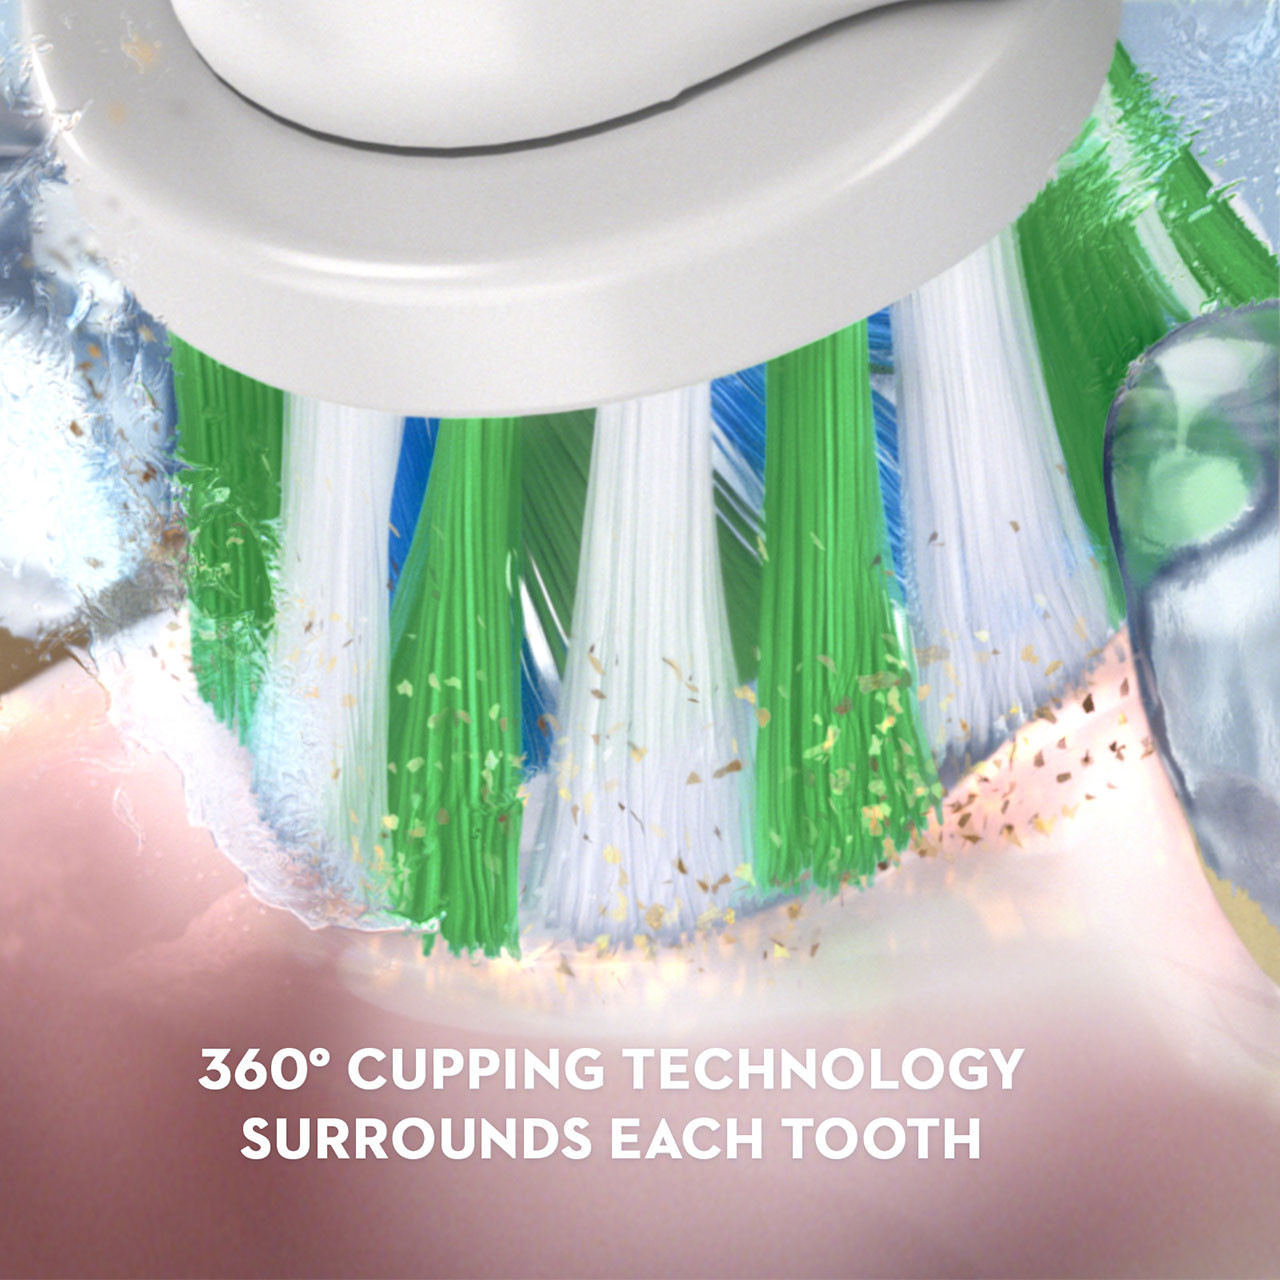 Oral-B Pro 1000 Duo (3 stores) find the best price now »